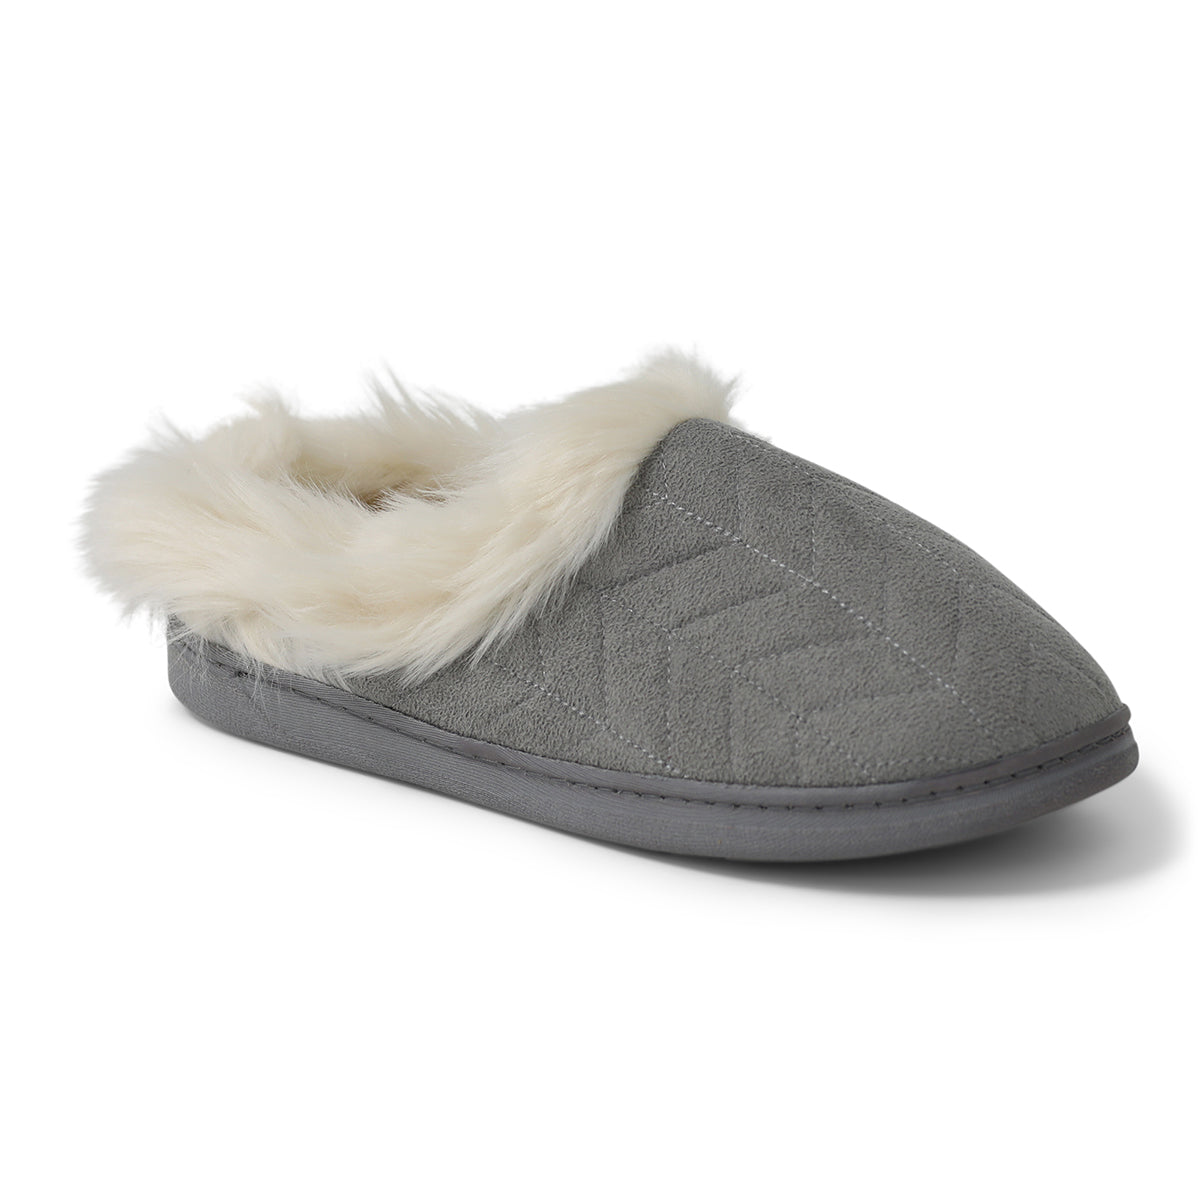 Jessica Simpson Womens Microsuede Clog Slippers Gray  M 7-8